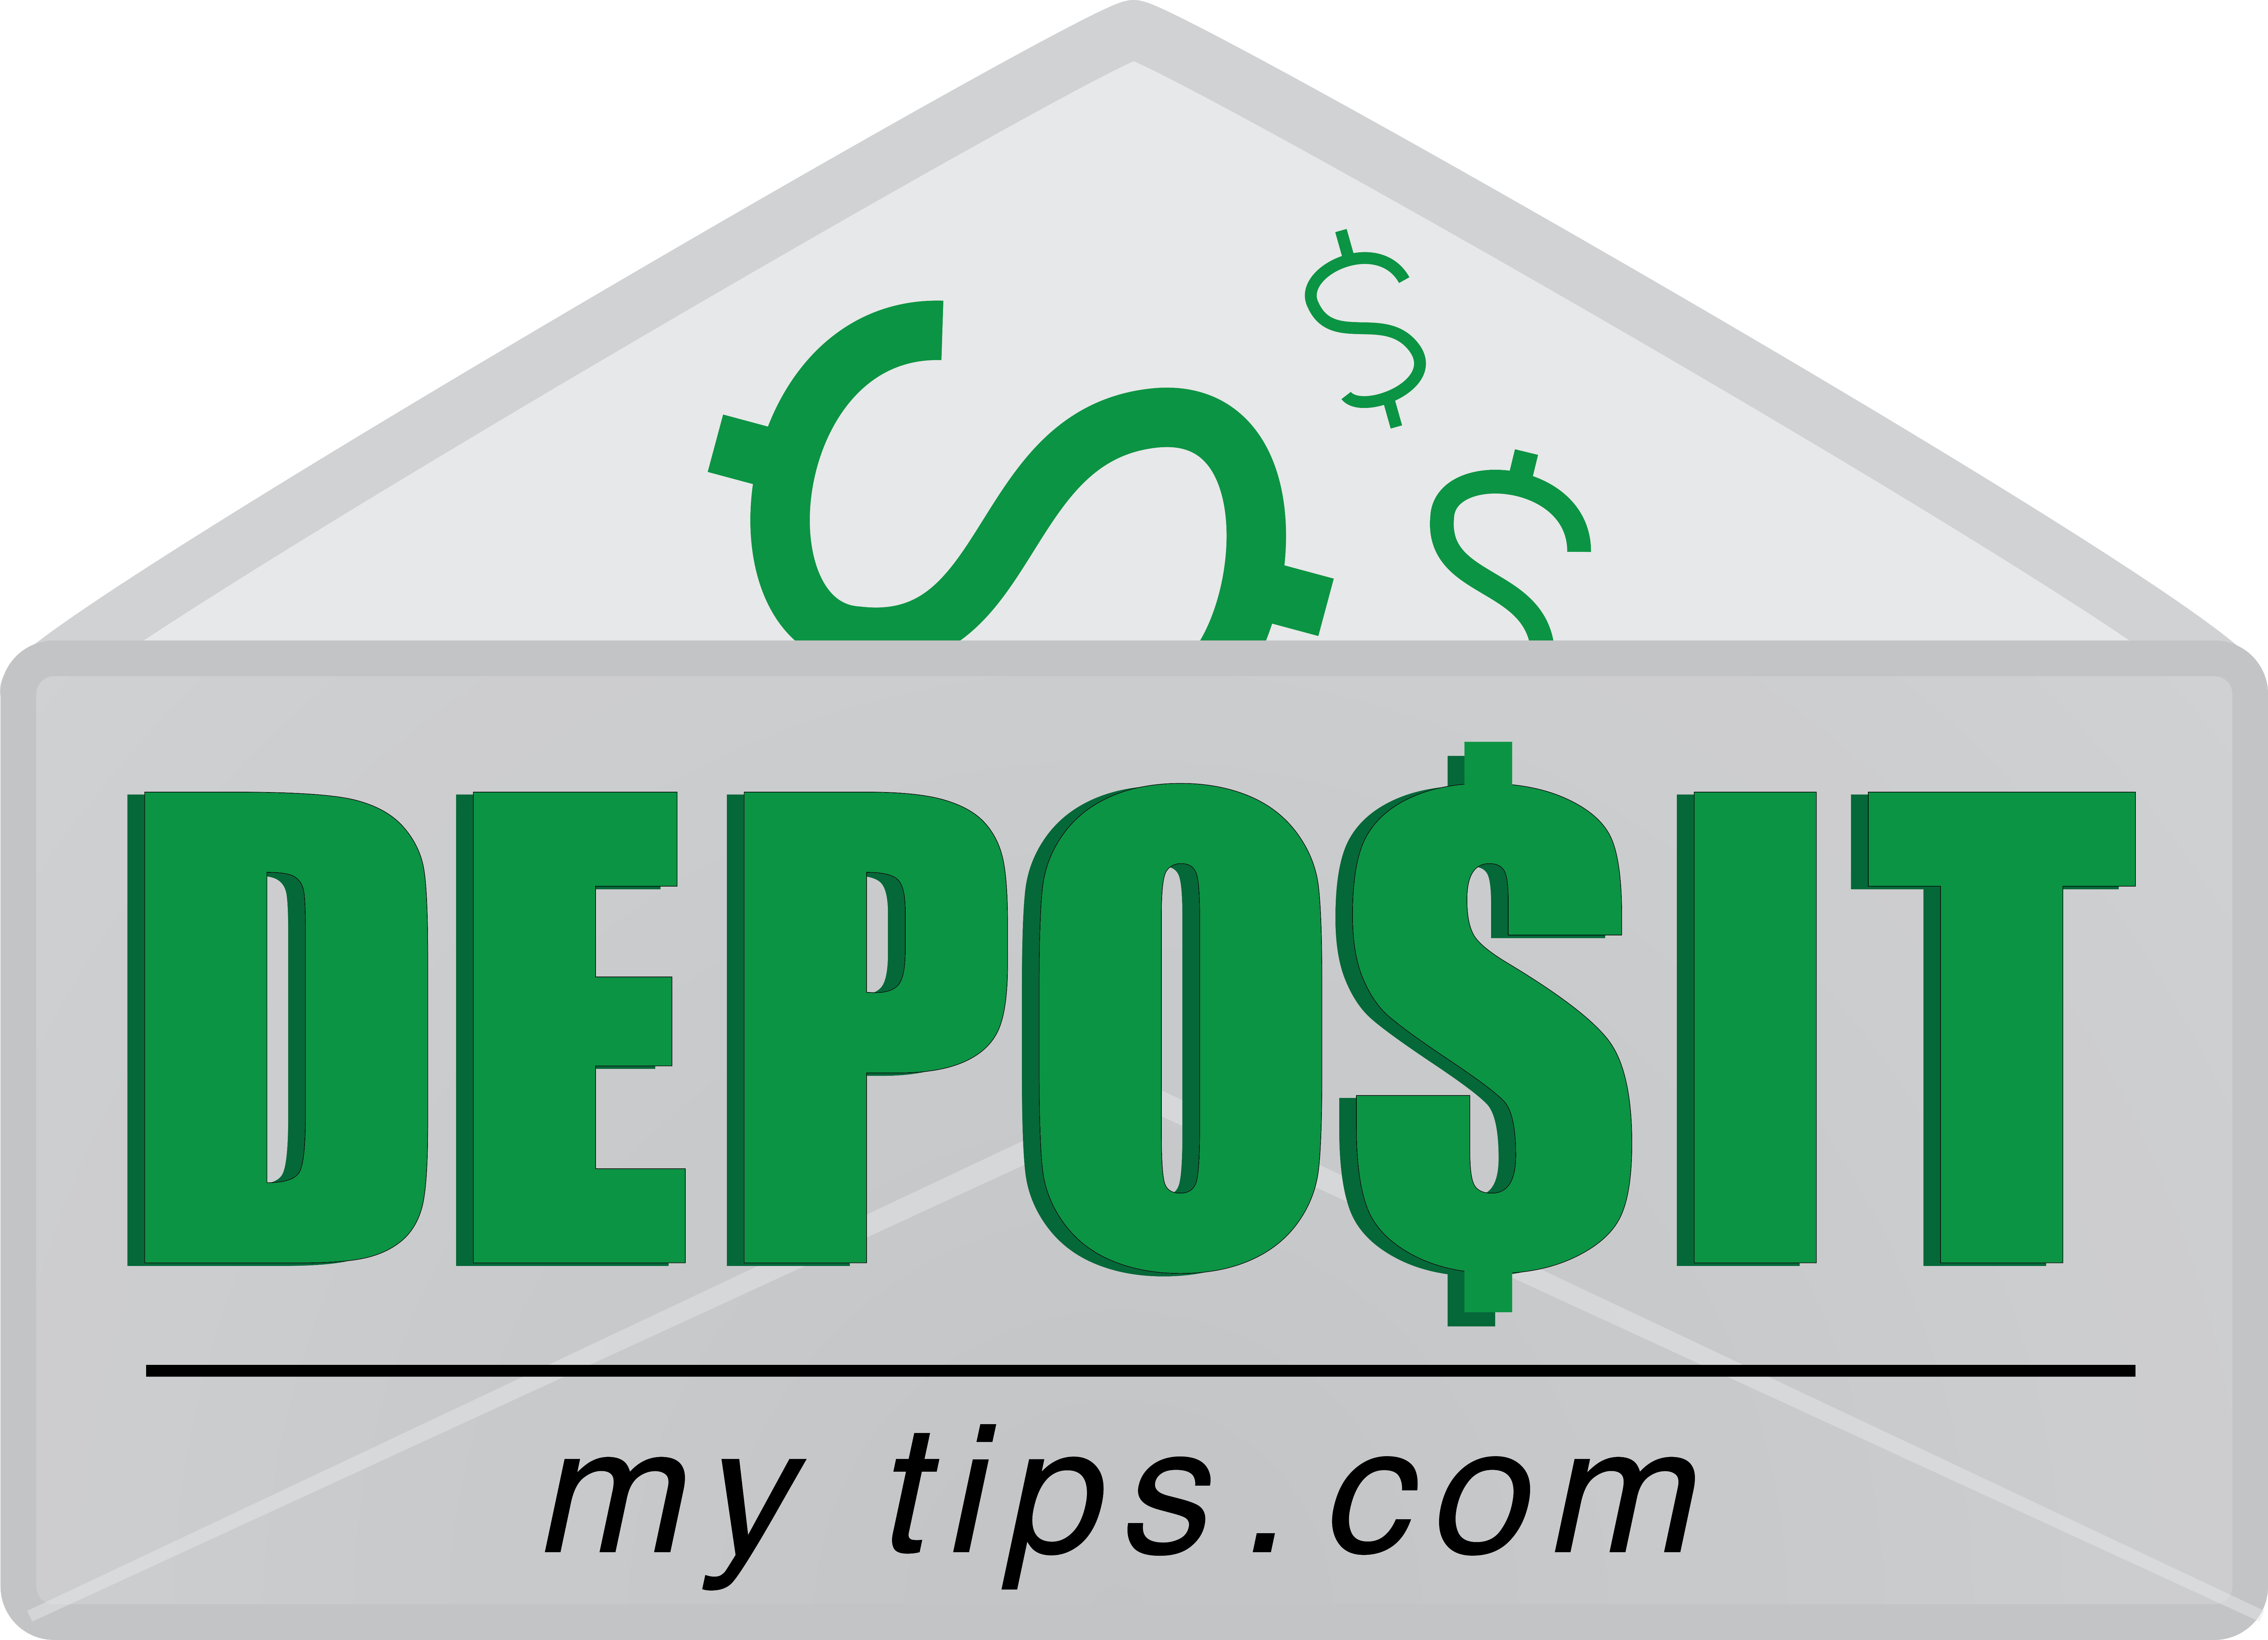 Tip Logo - The best way to eliminate controlled tip expenses | Deposit My Tips